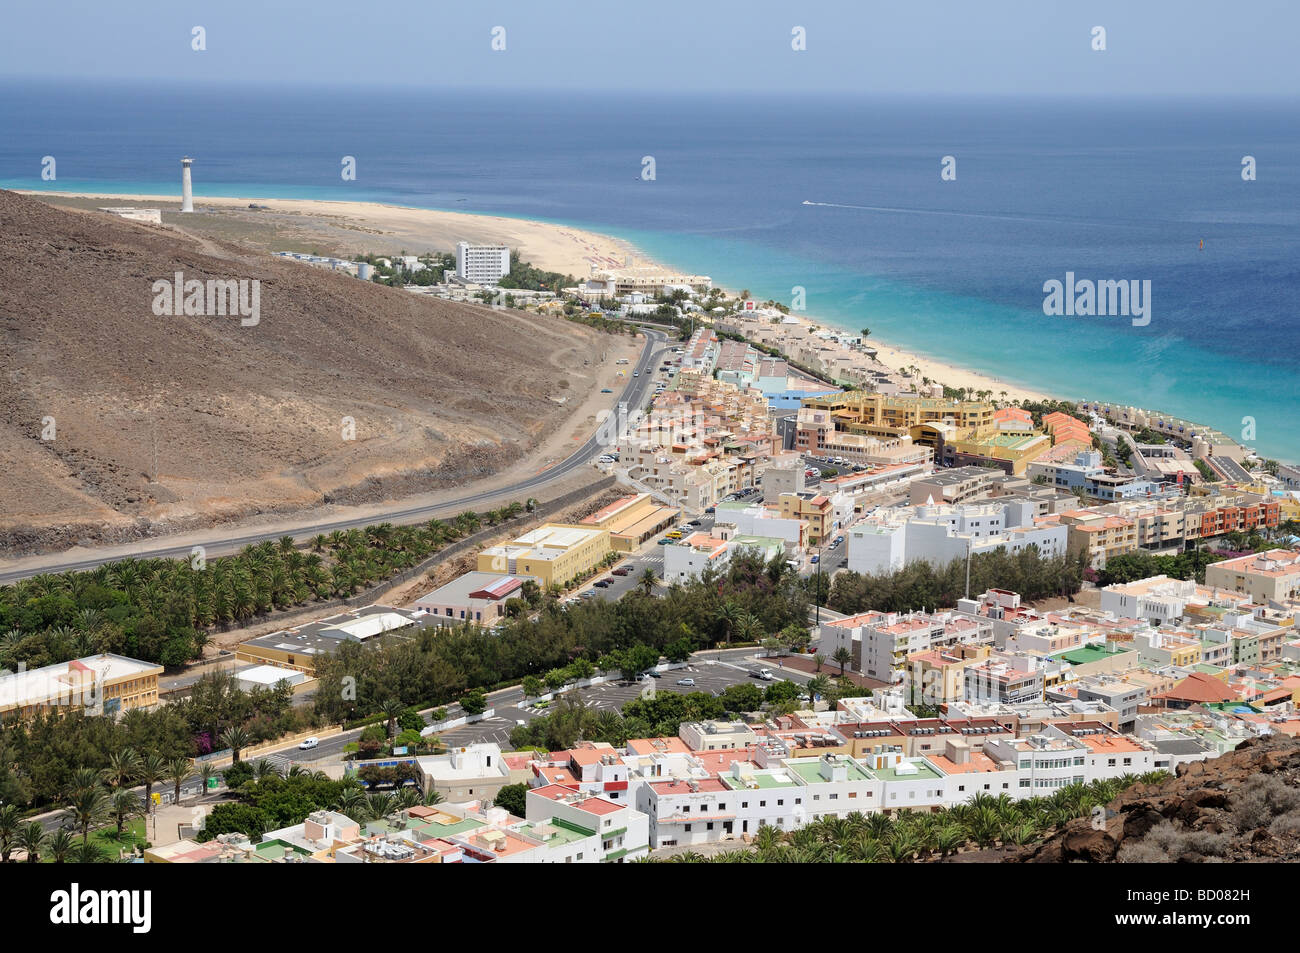 Aerial view over the town Morro Jable, Canary Island Fuerteventura, Spain Stock Photo